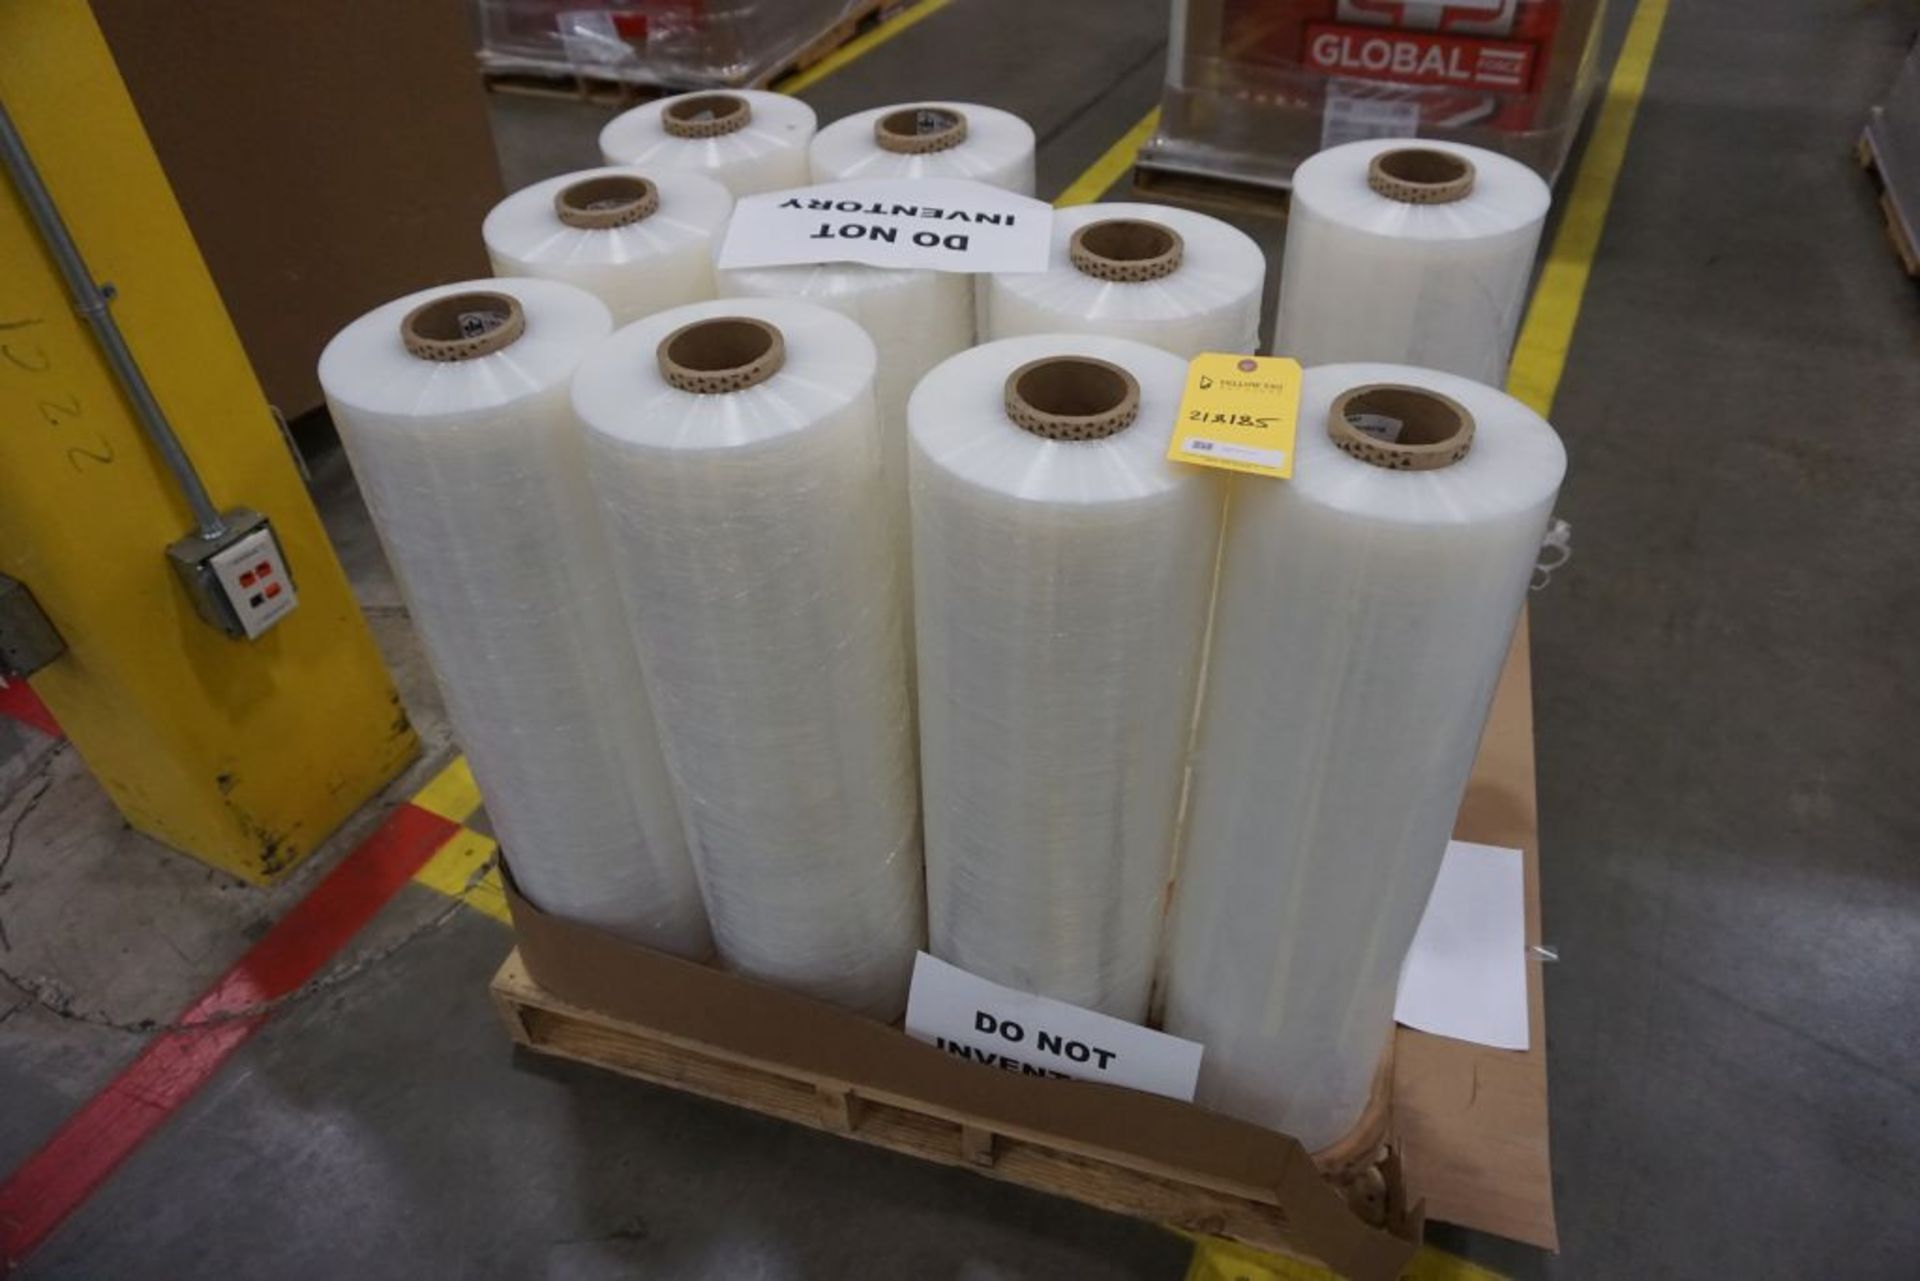 Lot of (11) Rolls of Global Force Stretch Wrap - GF 127750; Tag: 218185; Lot Loading Fee: $30